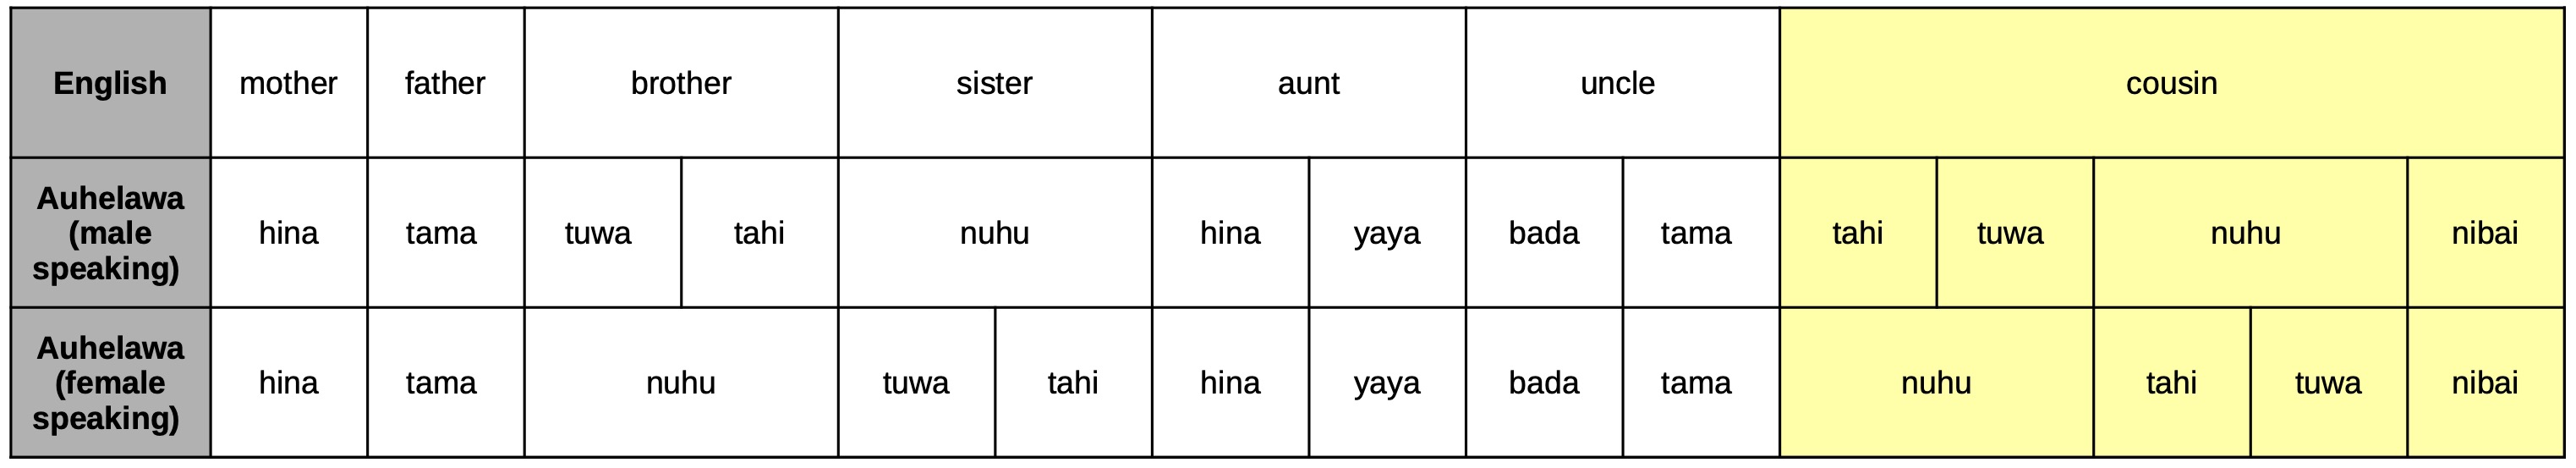 A table comparing several English terms for relatives with several incommensurable terms in Auhelawa